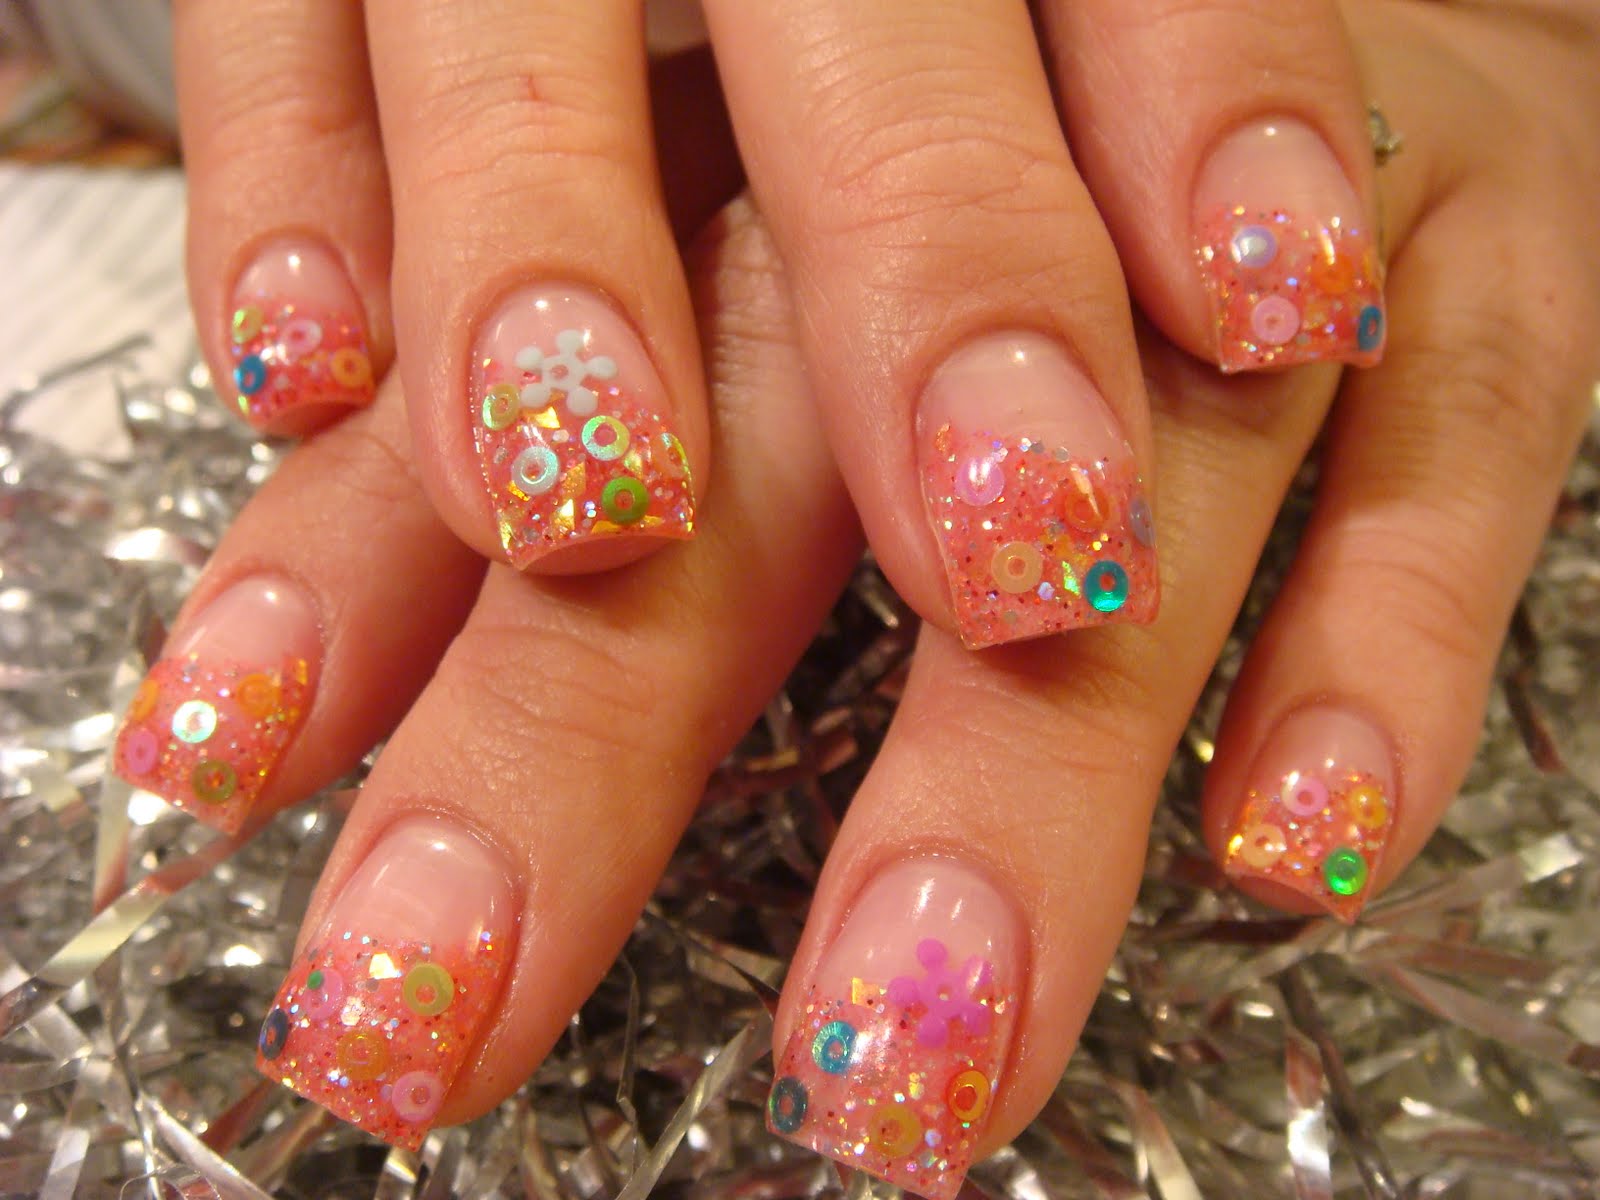 7. Nail Art Events in Las Vegas - wide 6